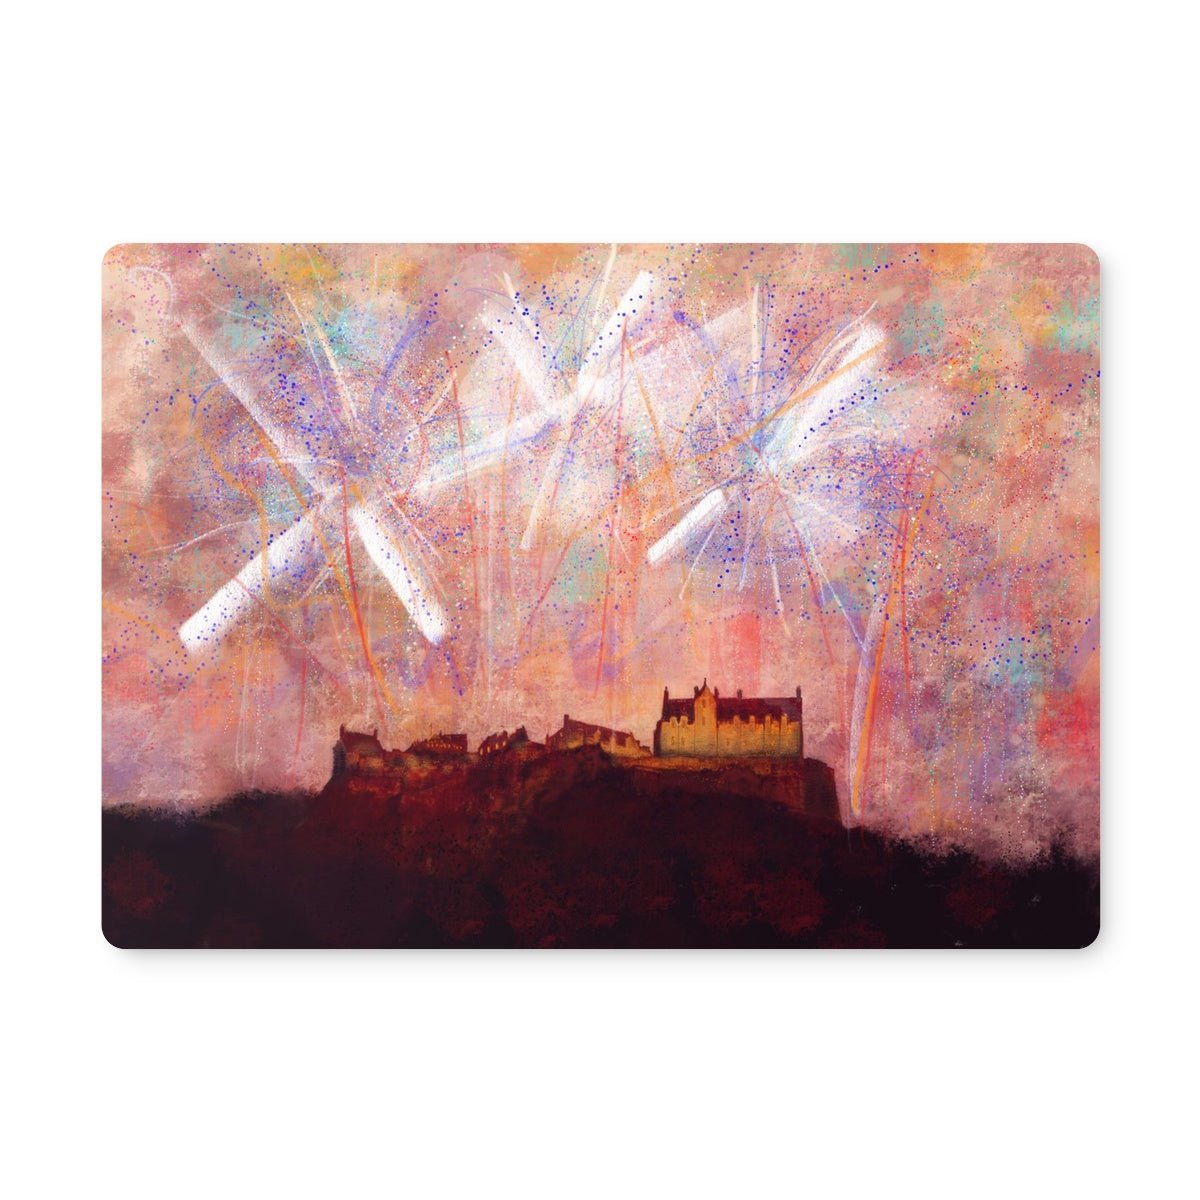 Edinburgh Castle Fireworks Art Gifts Placemat-Placemats-Edinburgh & Glasgow Art Gallery-6 Placemats-Paintings, Prints, Homeware, Art Gifts From Scotland By Scottish Artist Kevin Hunter